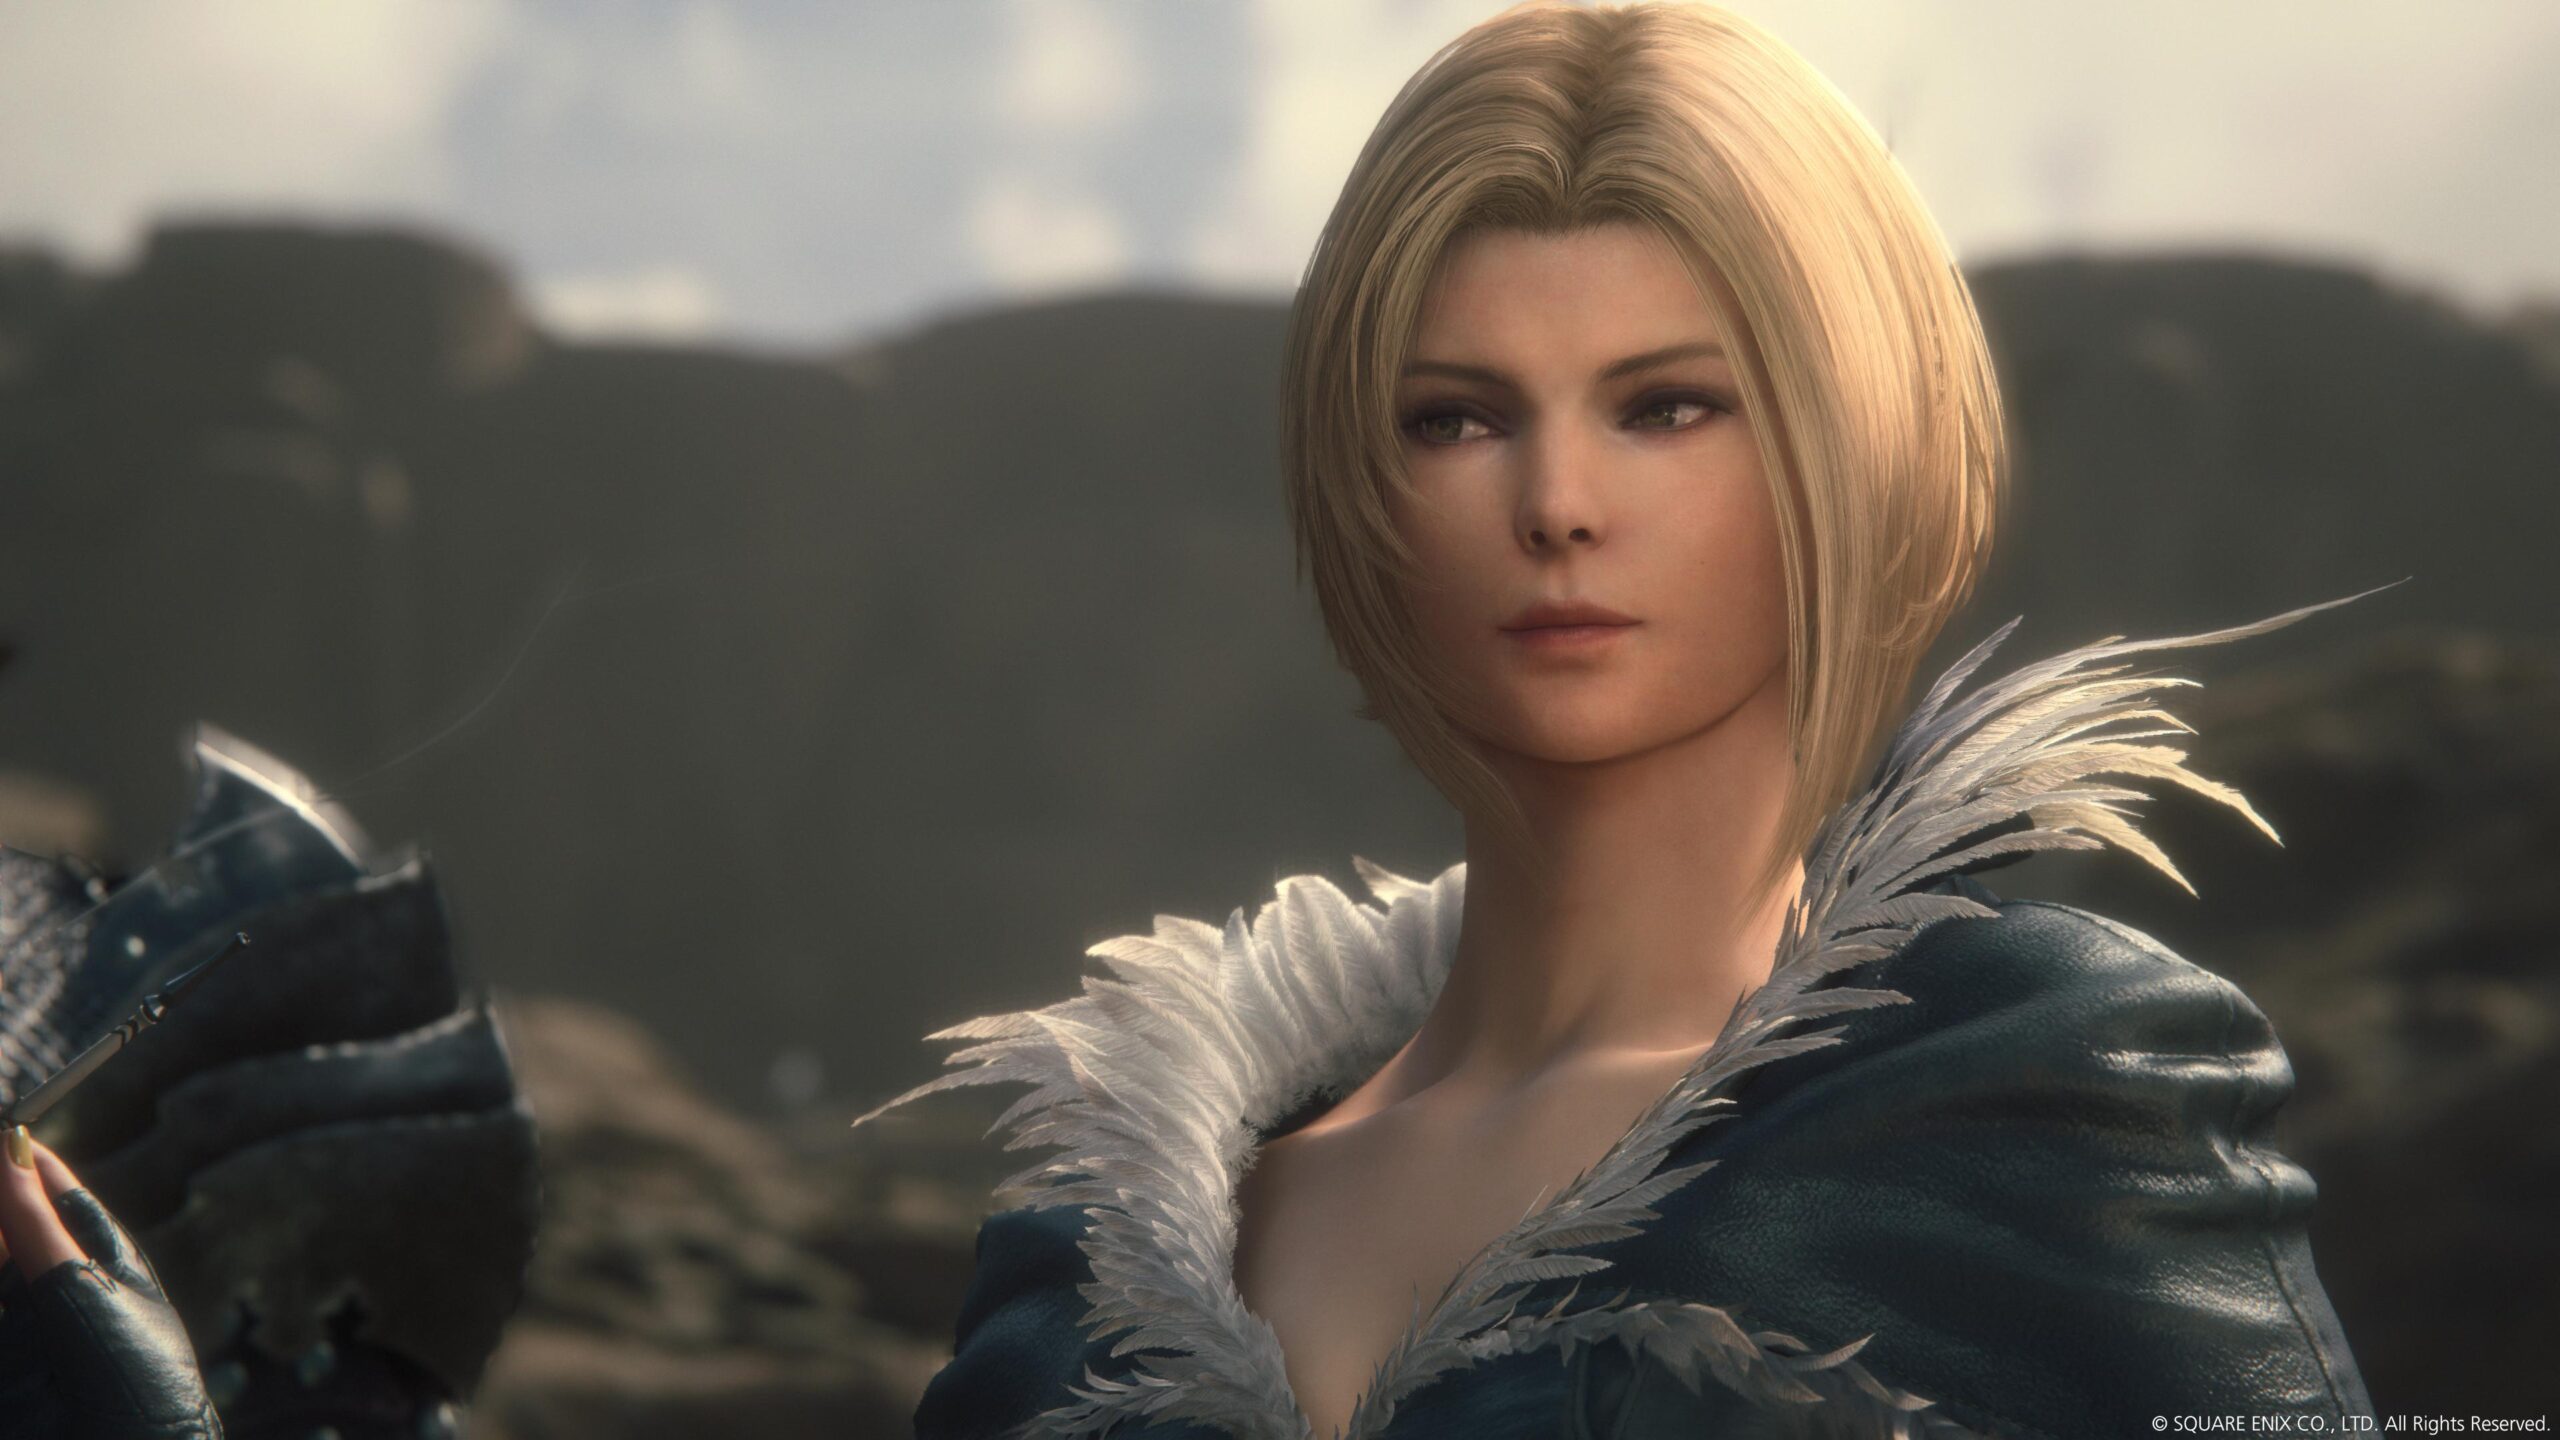 The Final Fantasy 16 PC version is official, at last